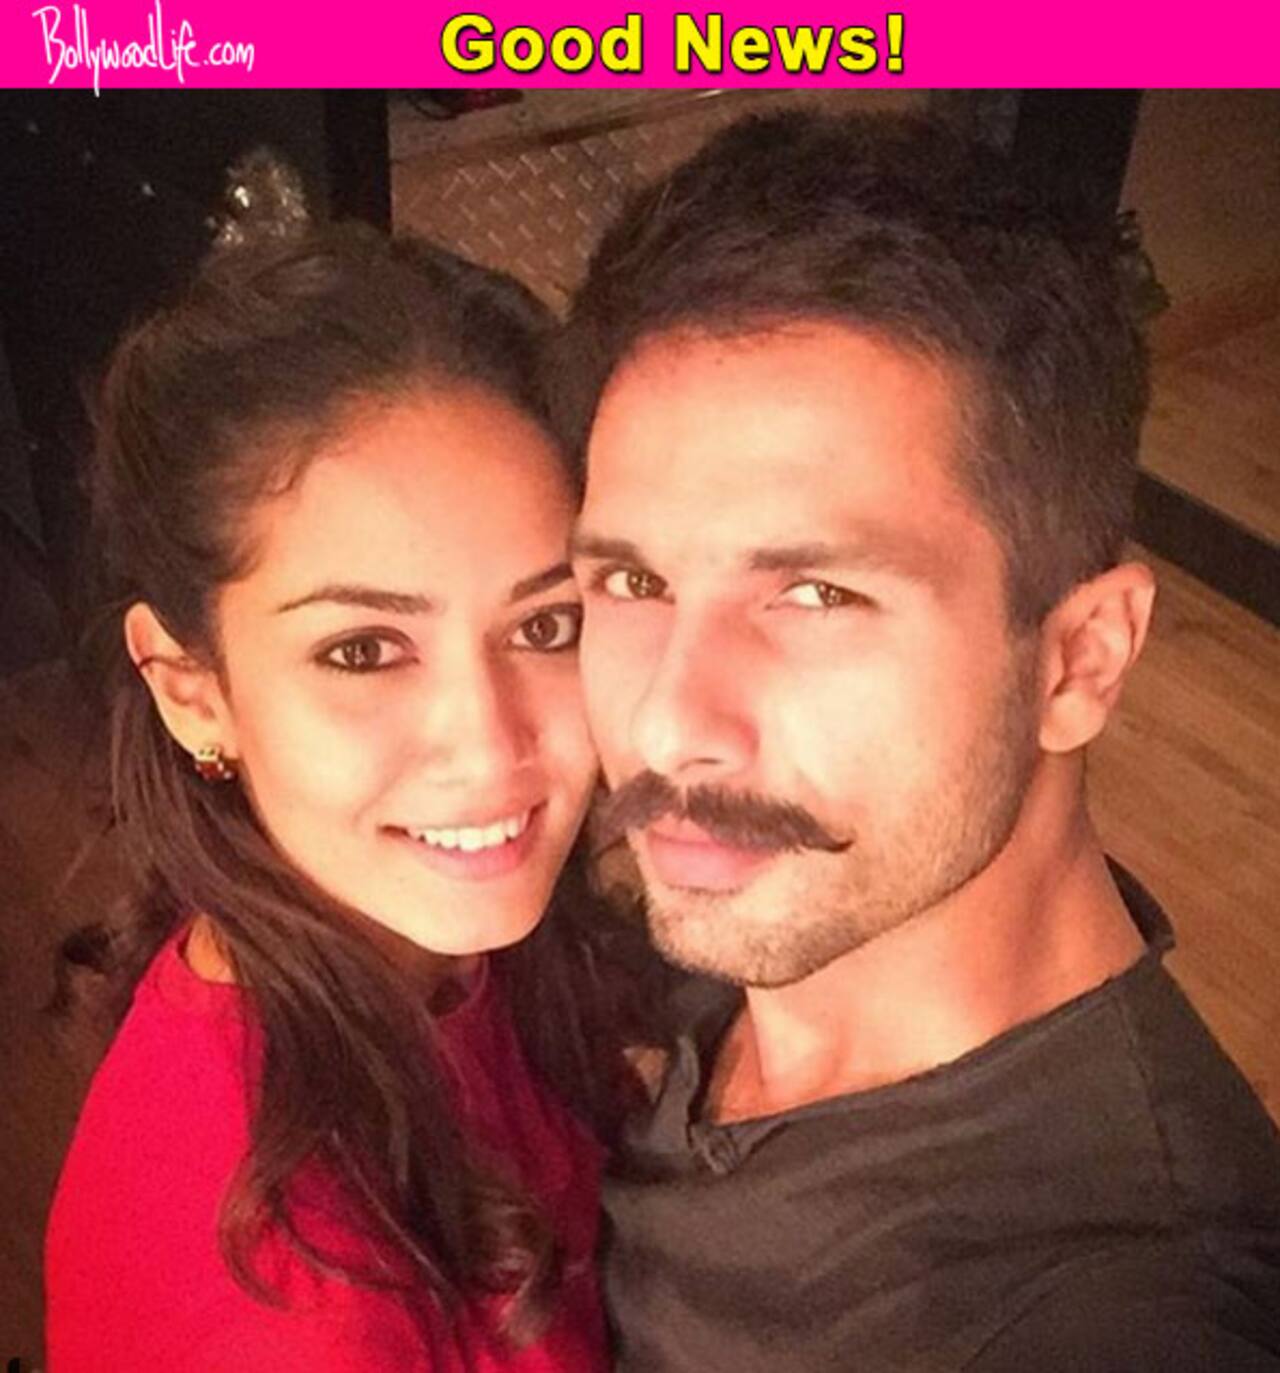 Shahid Kapoor S Wife Mira Rajput Is Pregnant Bollywood News And Gossip Movie Reviews Trailers